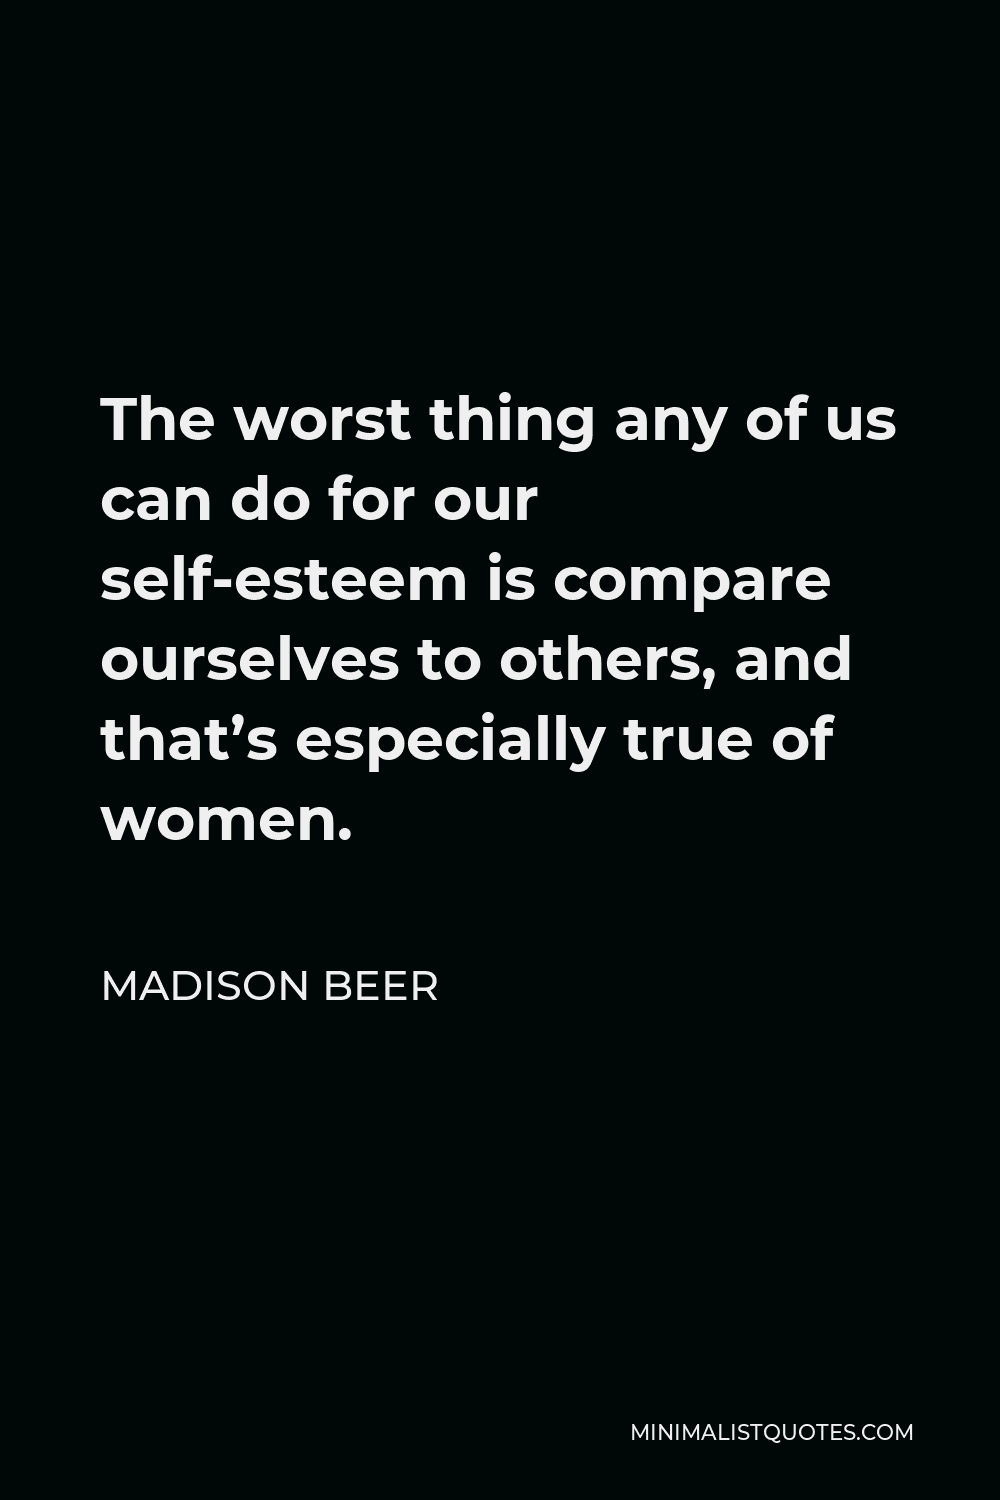 Madison Beer Quote - The worst thing any of us can do for our self-esteem is compare ourselves to others, and that’s especially true of women.